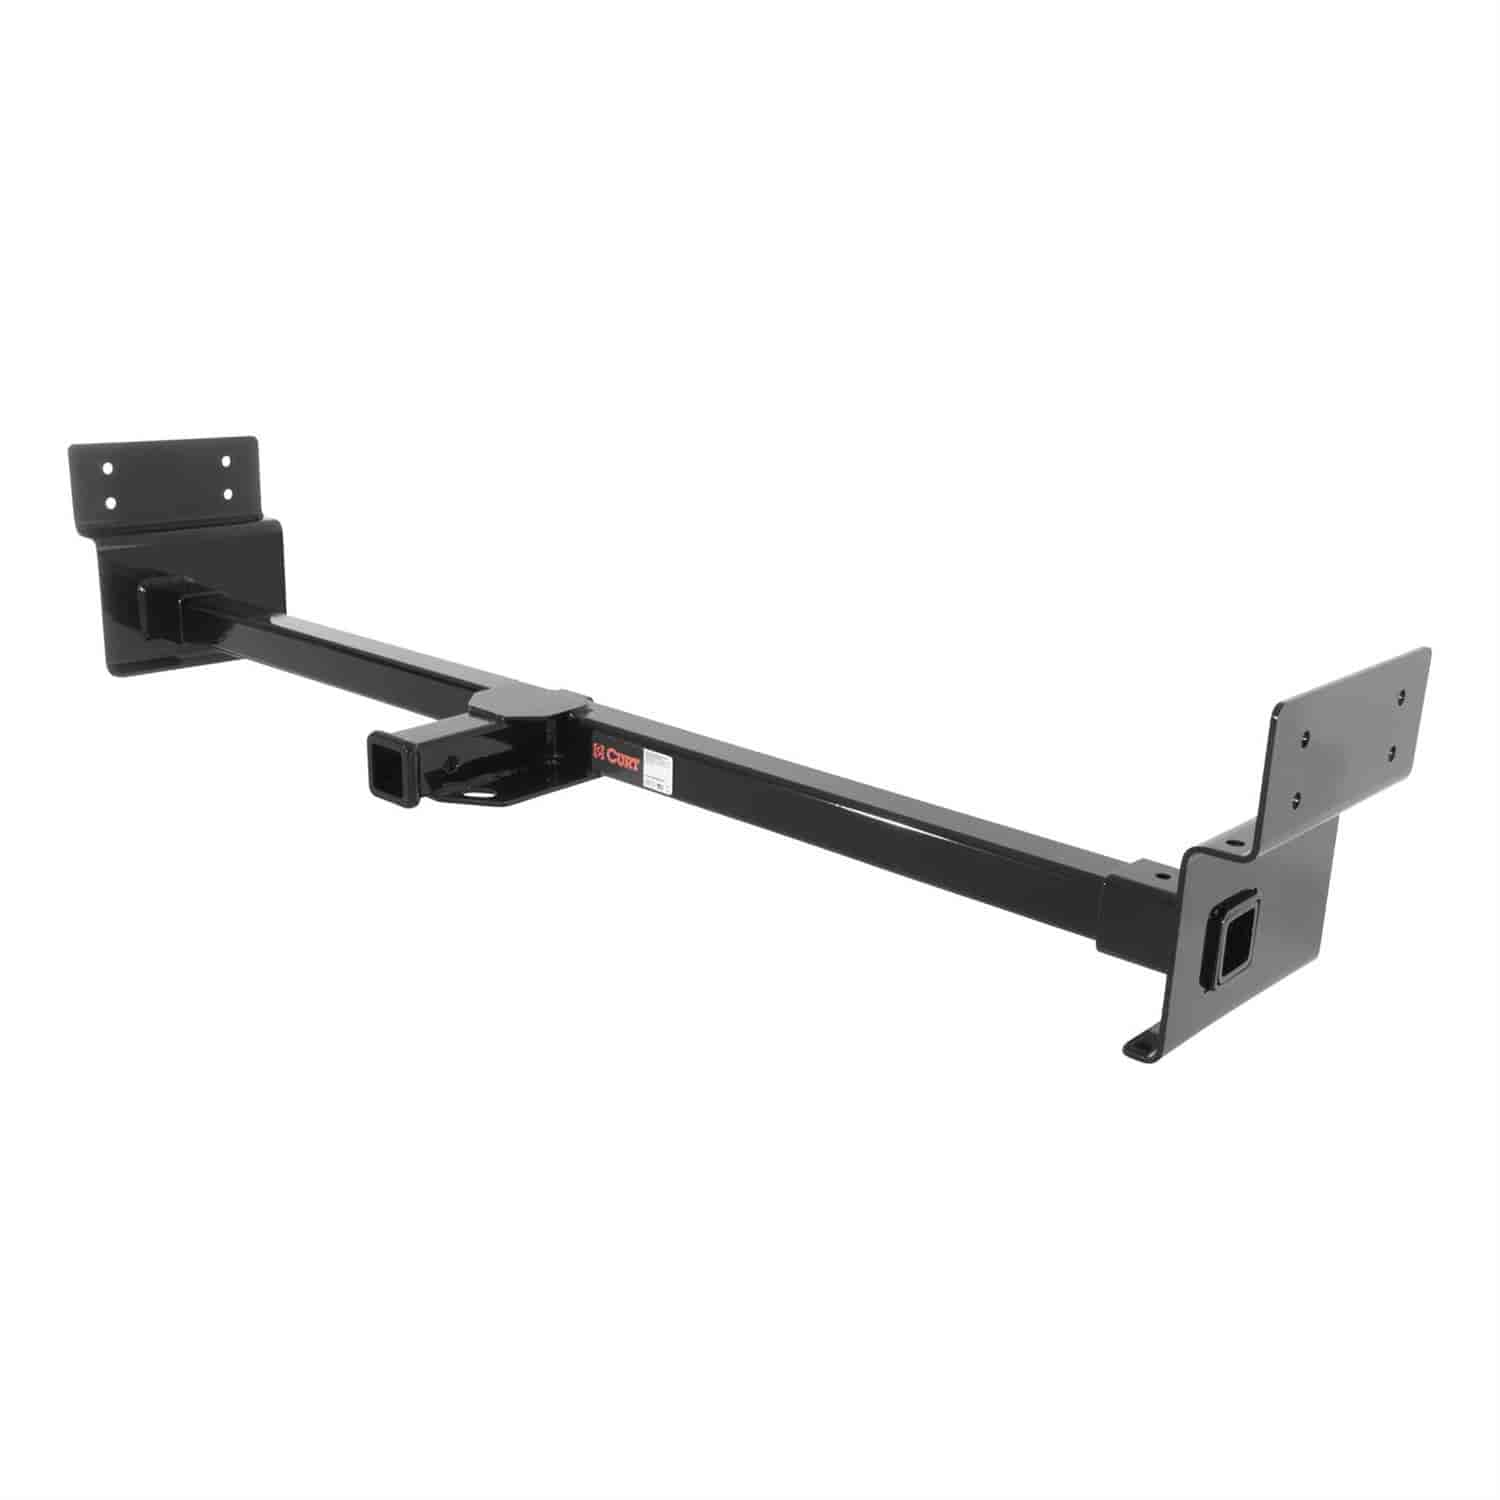 Class 3 Square Tube Adjustable Receiver Hitch Universal RV